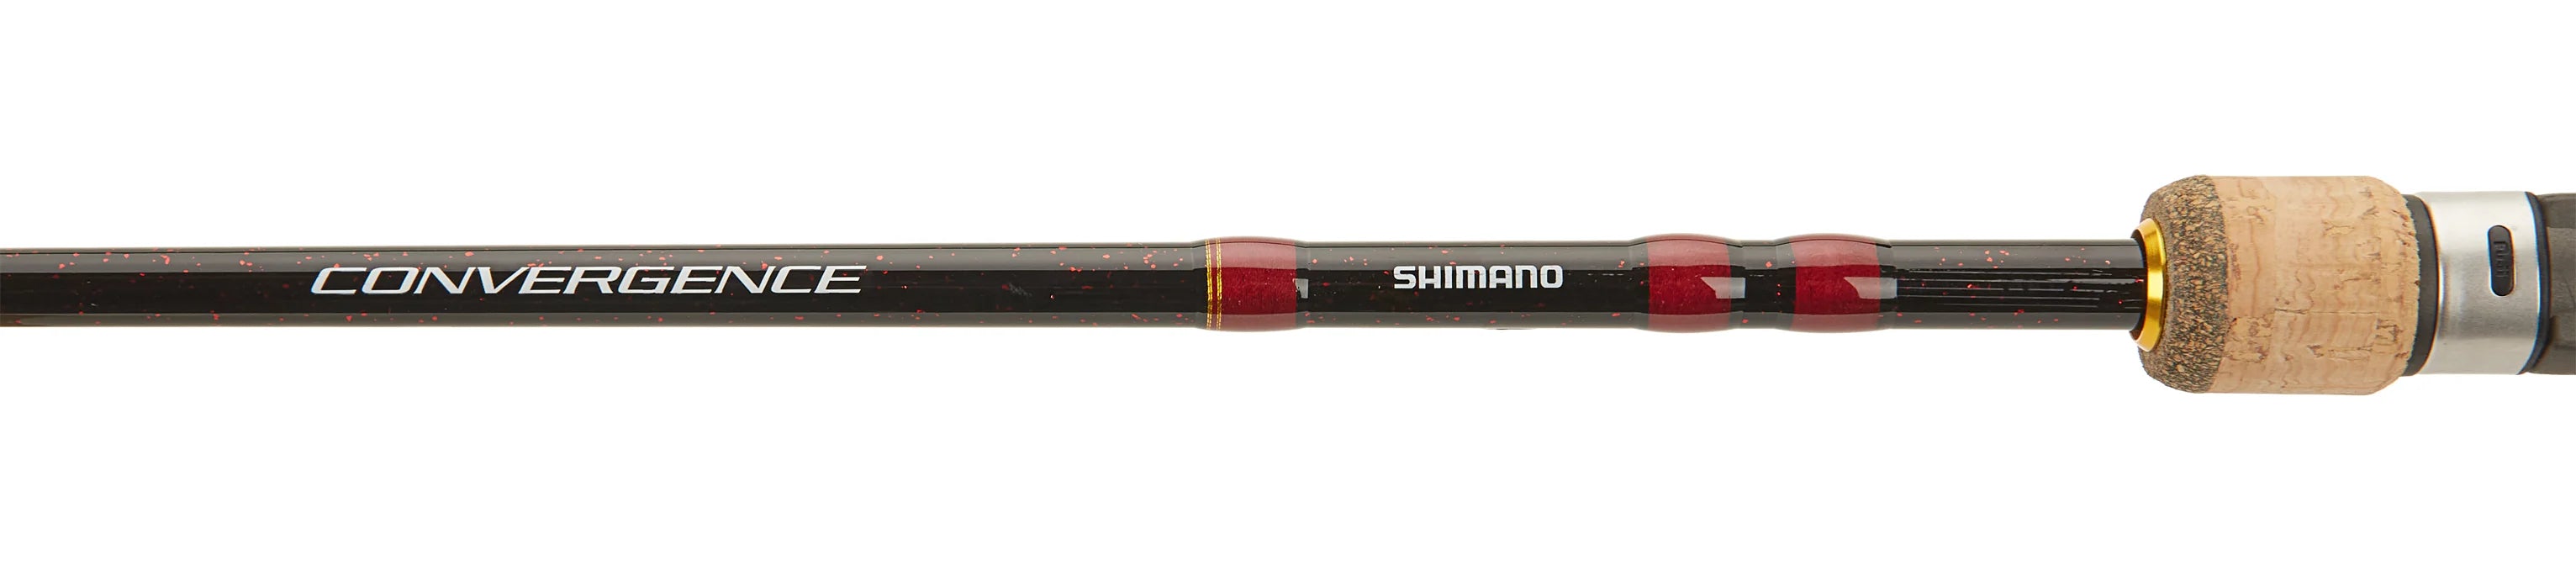 SHIMANO CONVERGENCE D CASTING RODS